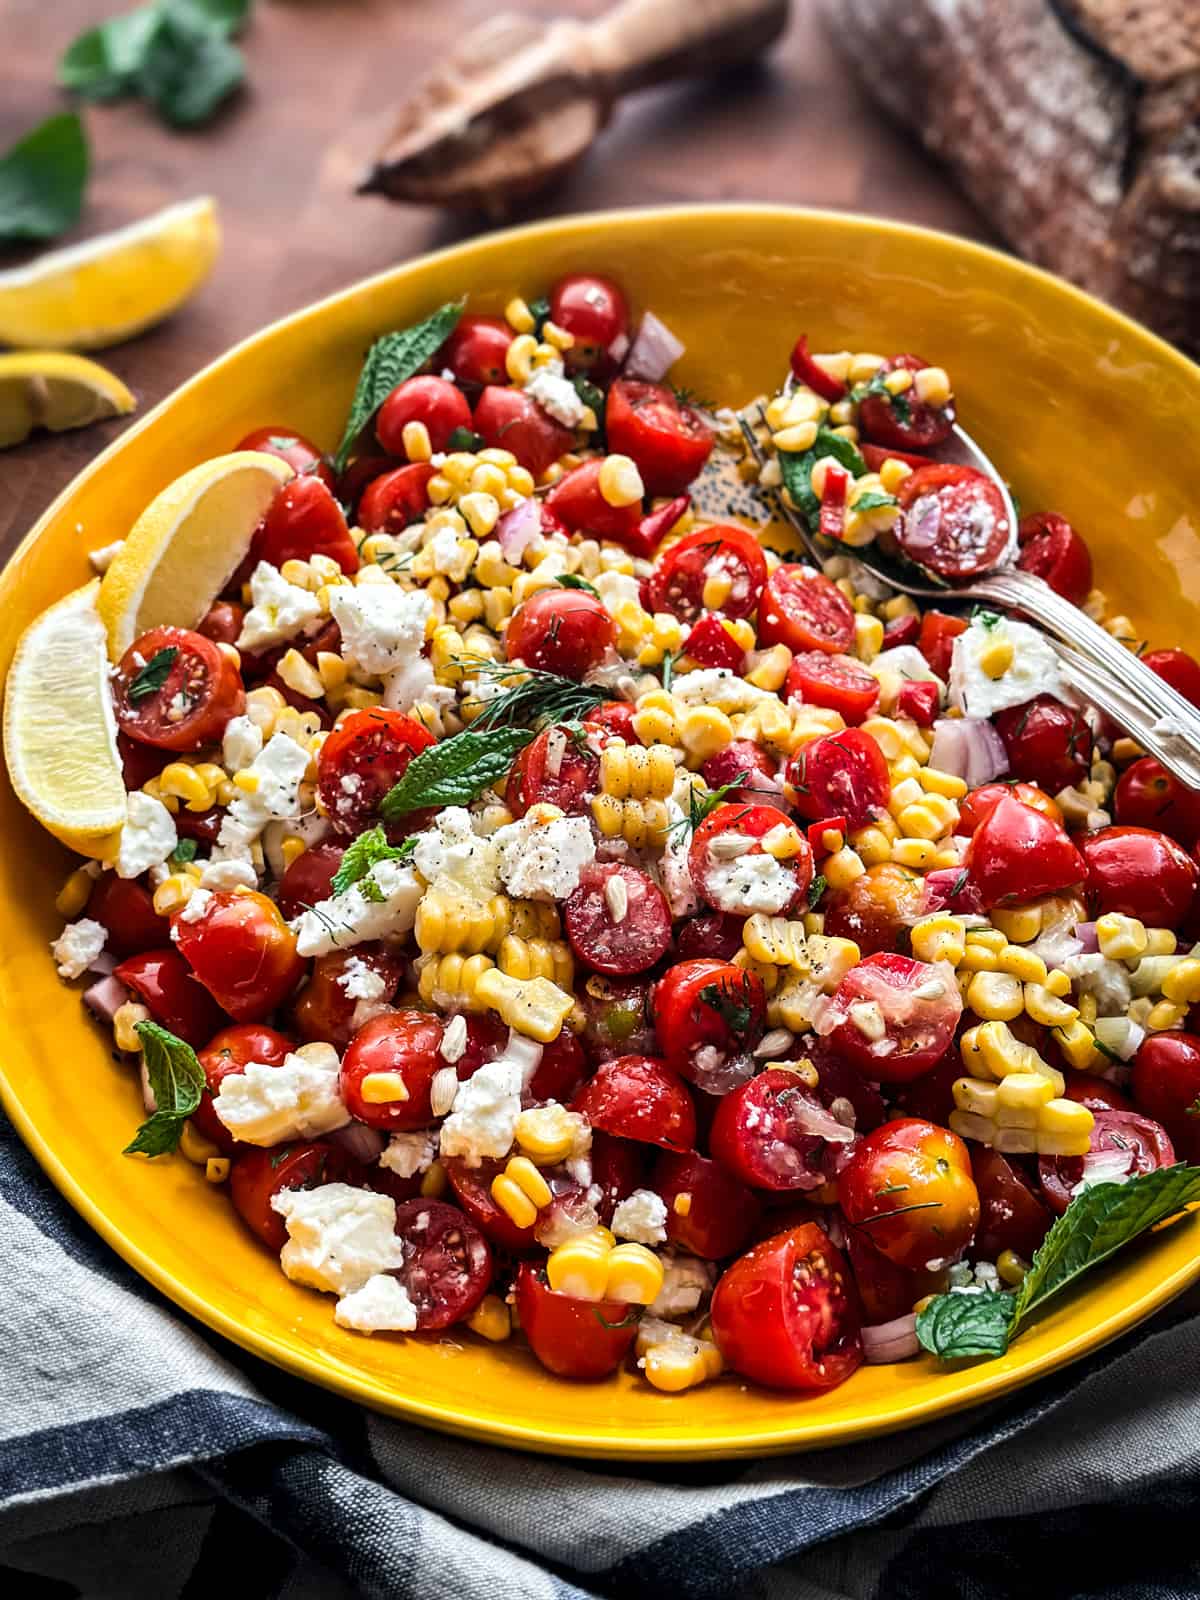 A yellow serving bowl with corn tomato salad with feta, lemon wedges and serving utensils, at the back a citrus juicer and a loaf of bread.